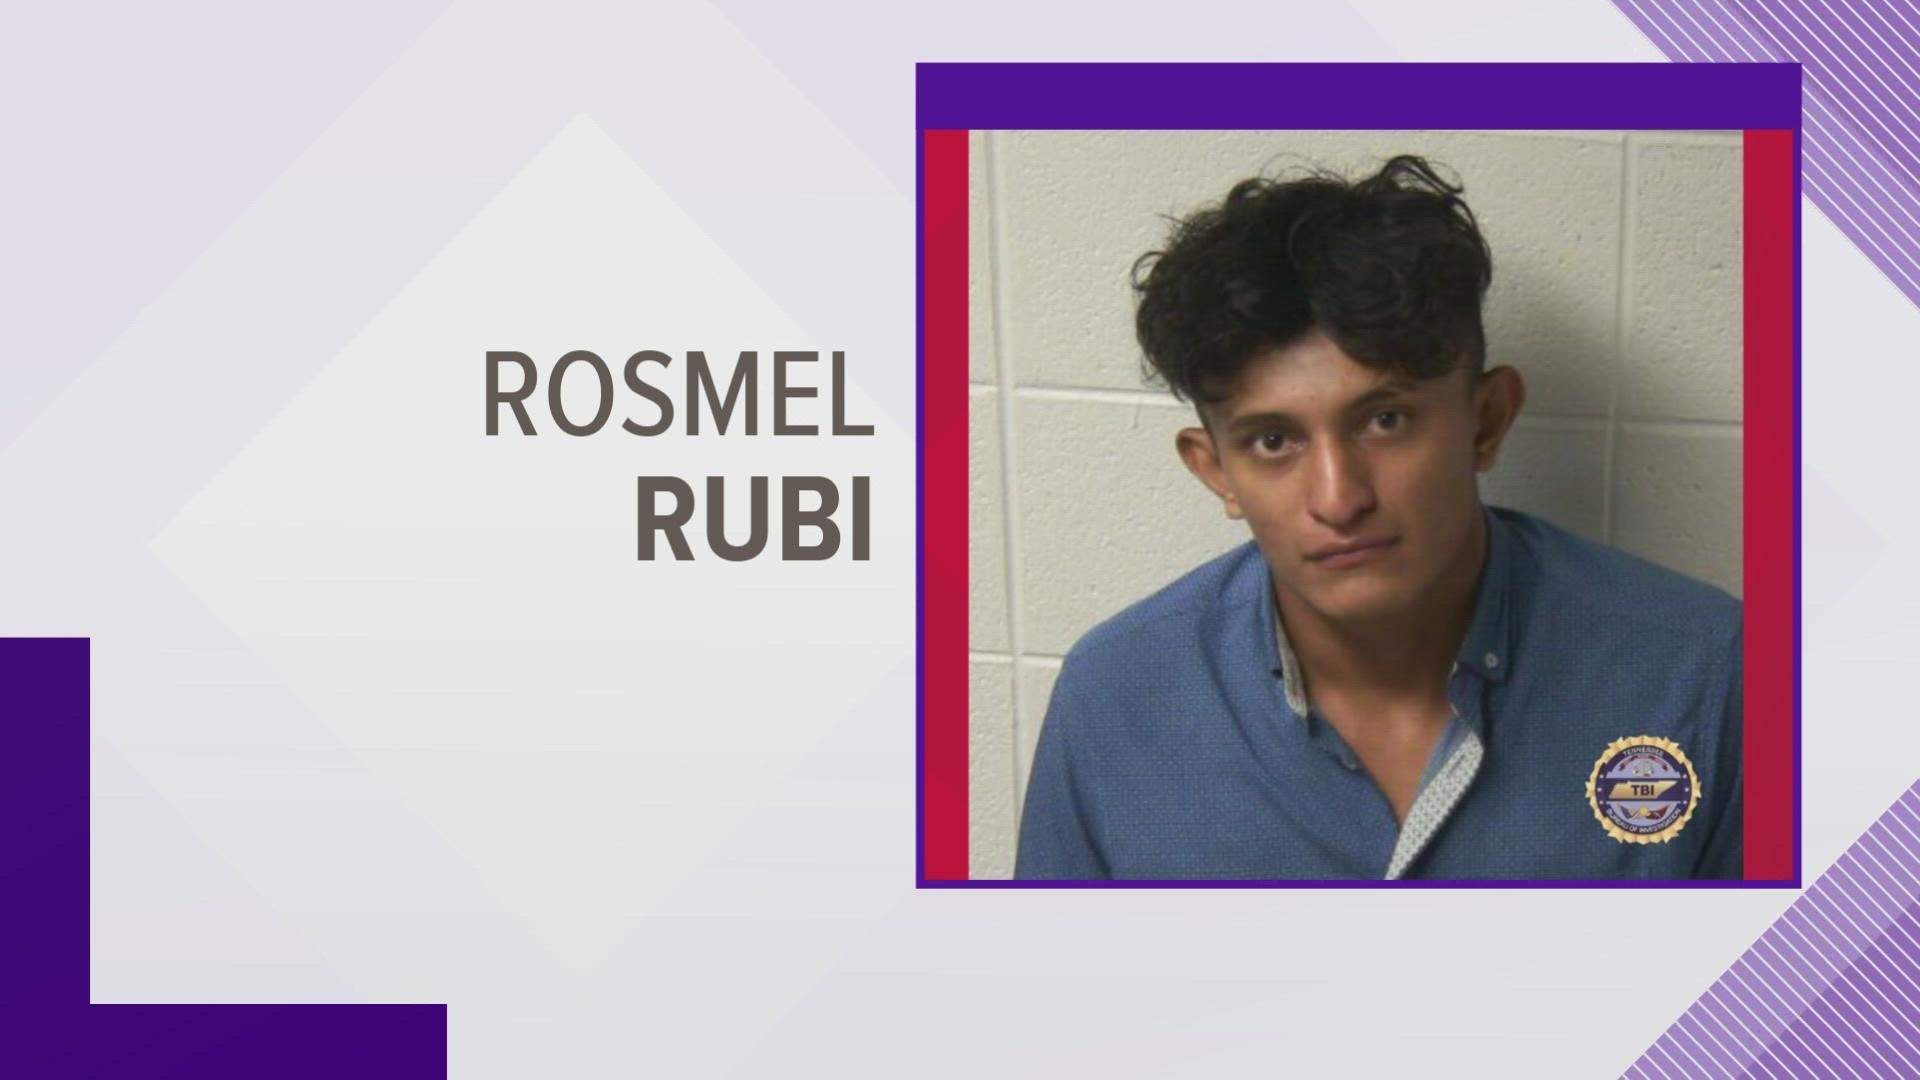 Gatlinburg police said Rosmel Danilo Rubi is suspected to be involved in the death of a man whose body was found Wednesday.